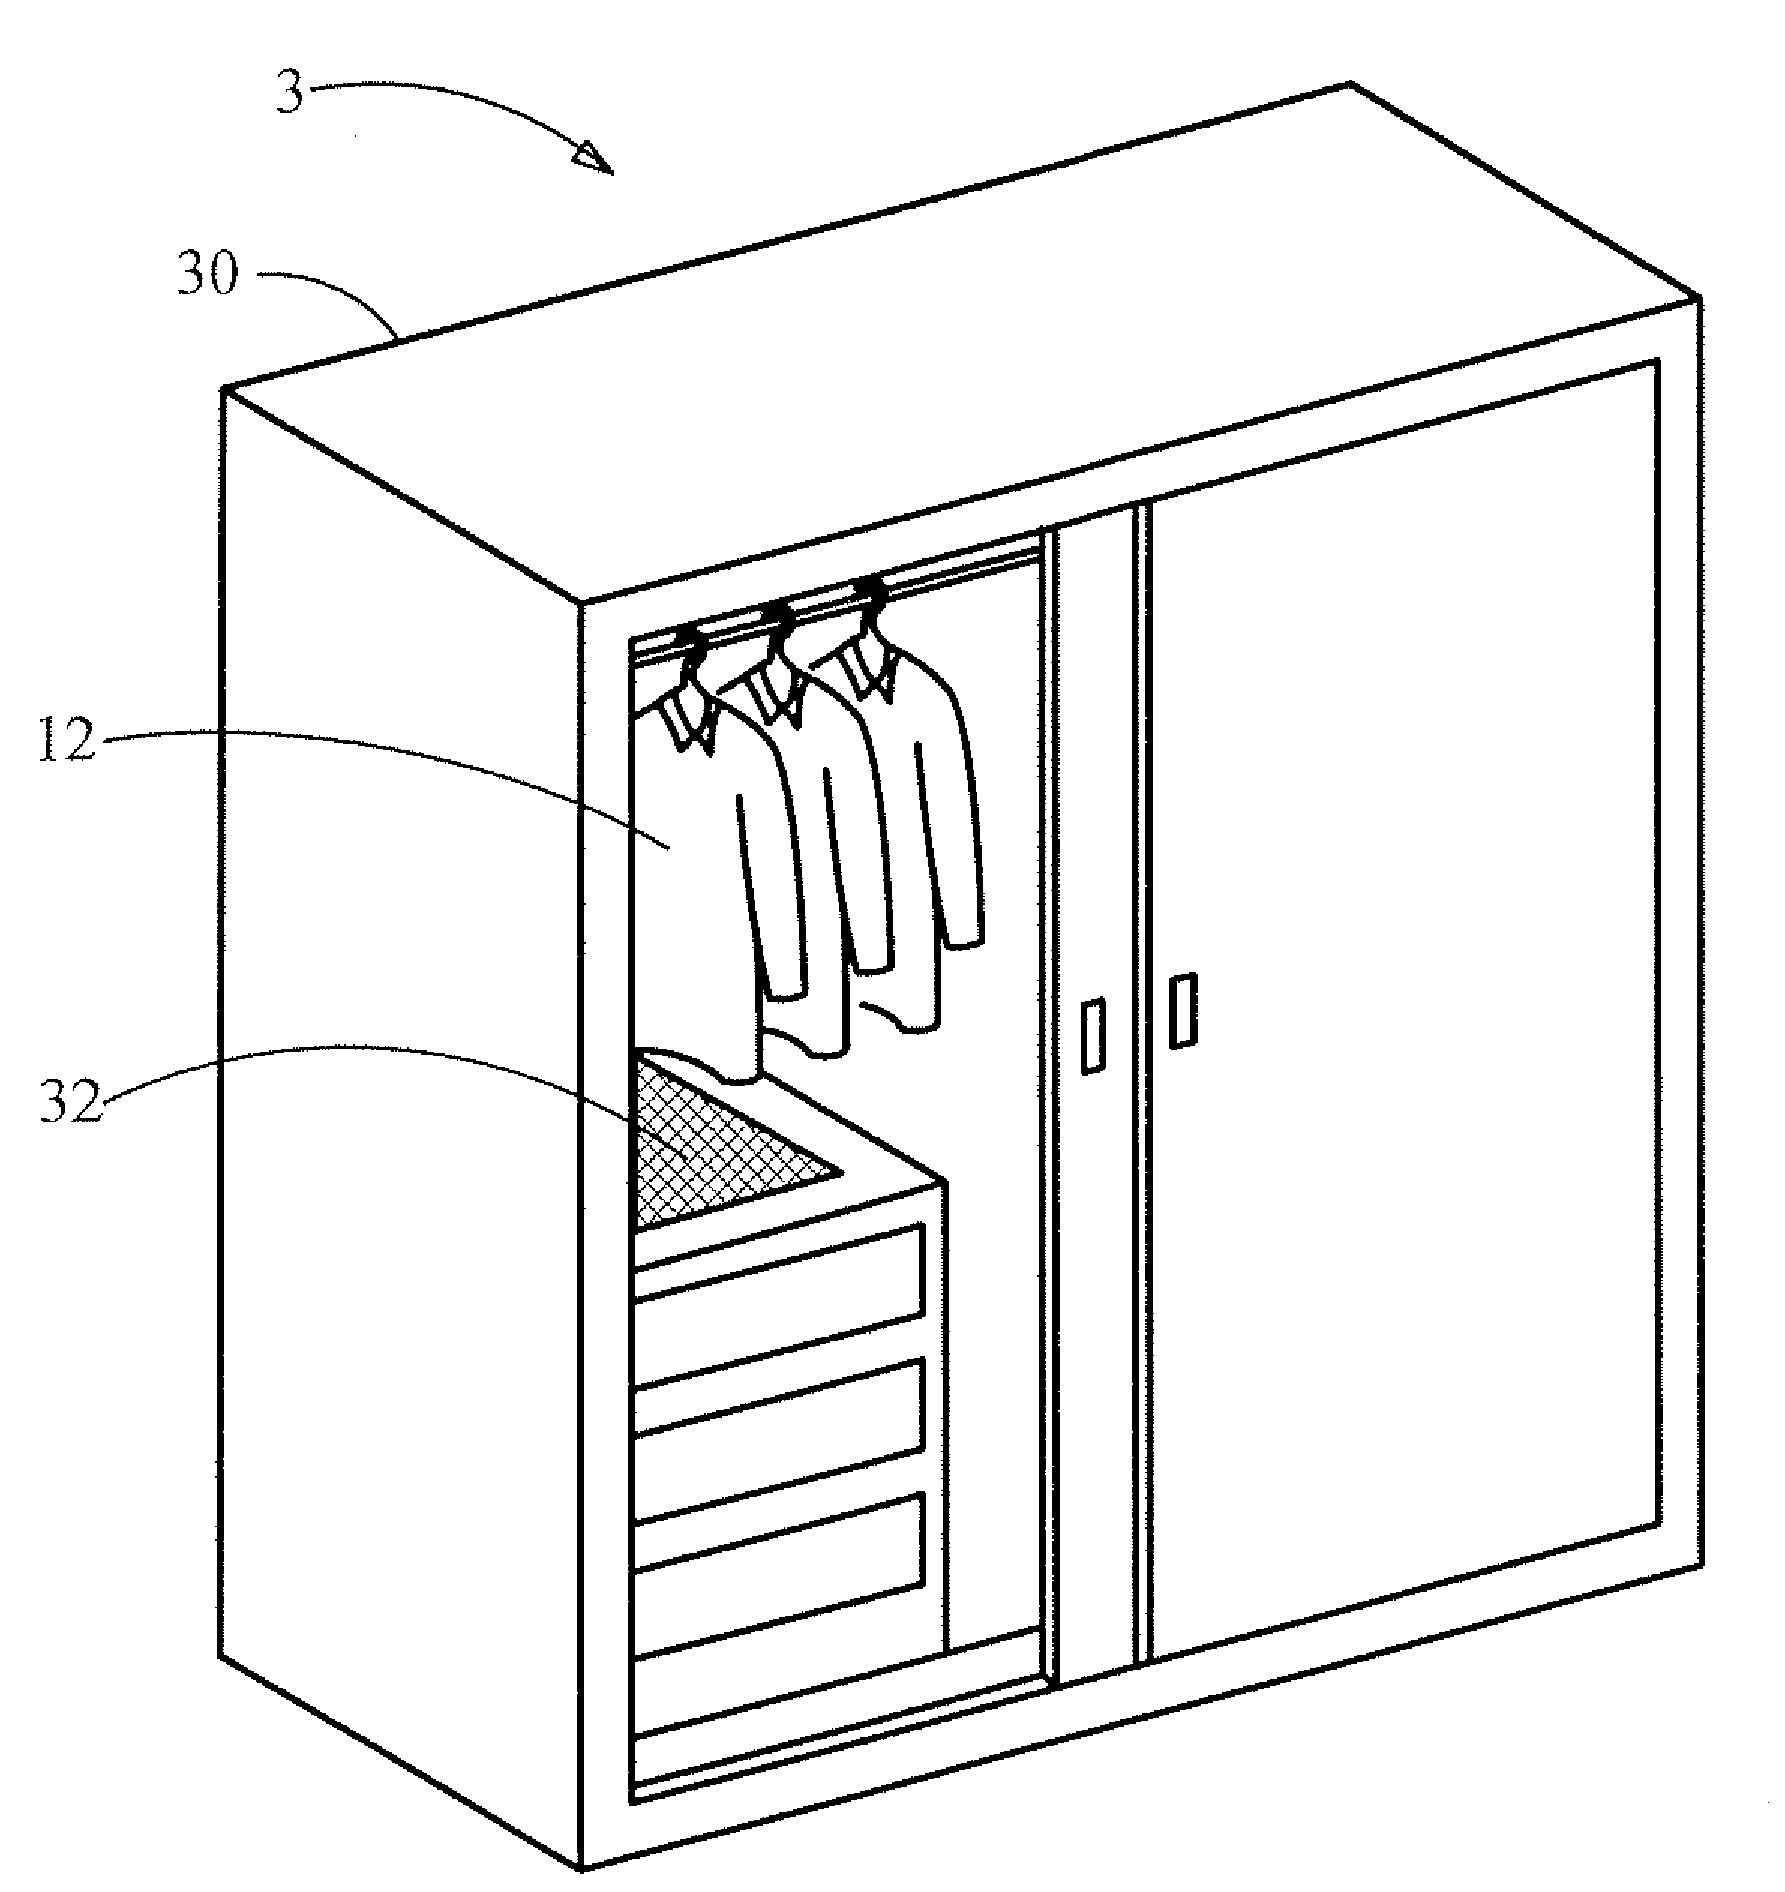 Sterilization apparatus for fabric and shoes